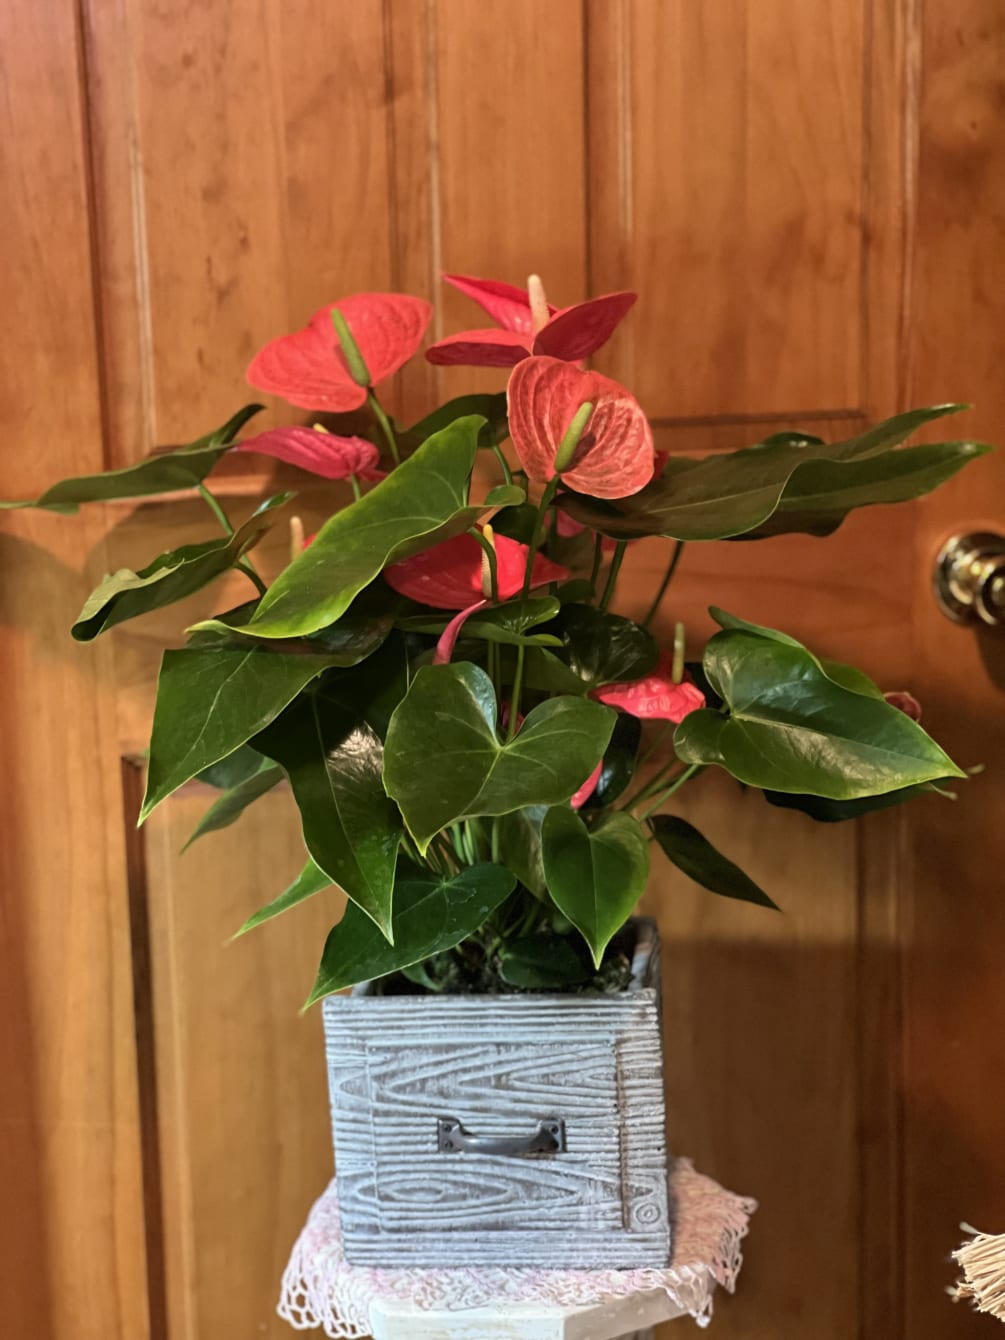 This beautiful flowering Anthurium Plant comes in a heavy ceramic pot shaped